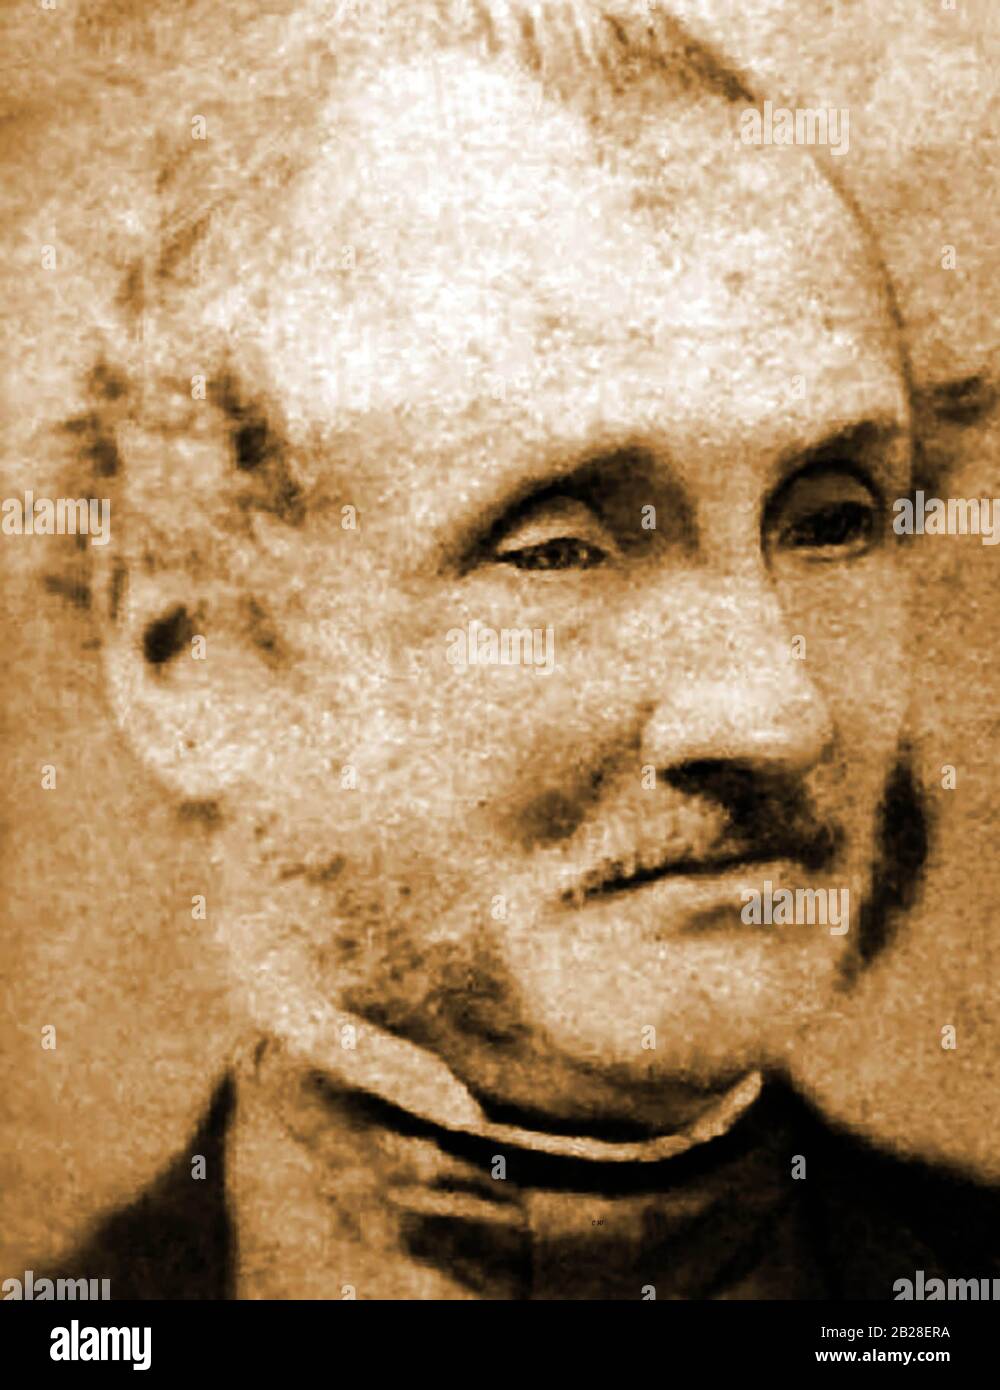 A portrait of William Marwood a cobbler of Hornchurch (UK) who became a Middlesex and  government  Hangman in 1874. He developed the technique of hanging known as the 'long drop' which ensured that the prisoner's neck was broken and he died instantly., as opposed to the standard 'short drop' where the prisoner was strangled. A popular riddle of the time was 'If Pa killed Ma Who'd kill Pa?'. The answer was Marwood. Marwood. Some of his notable  executions included   Maolra Seoighe who was later found to have not been guilty and received a pardon. Seoighe spoke only Irish. Stock Photo